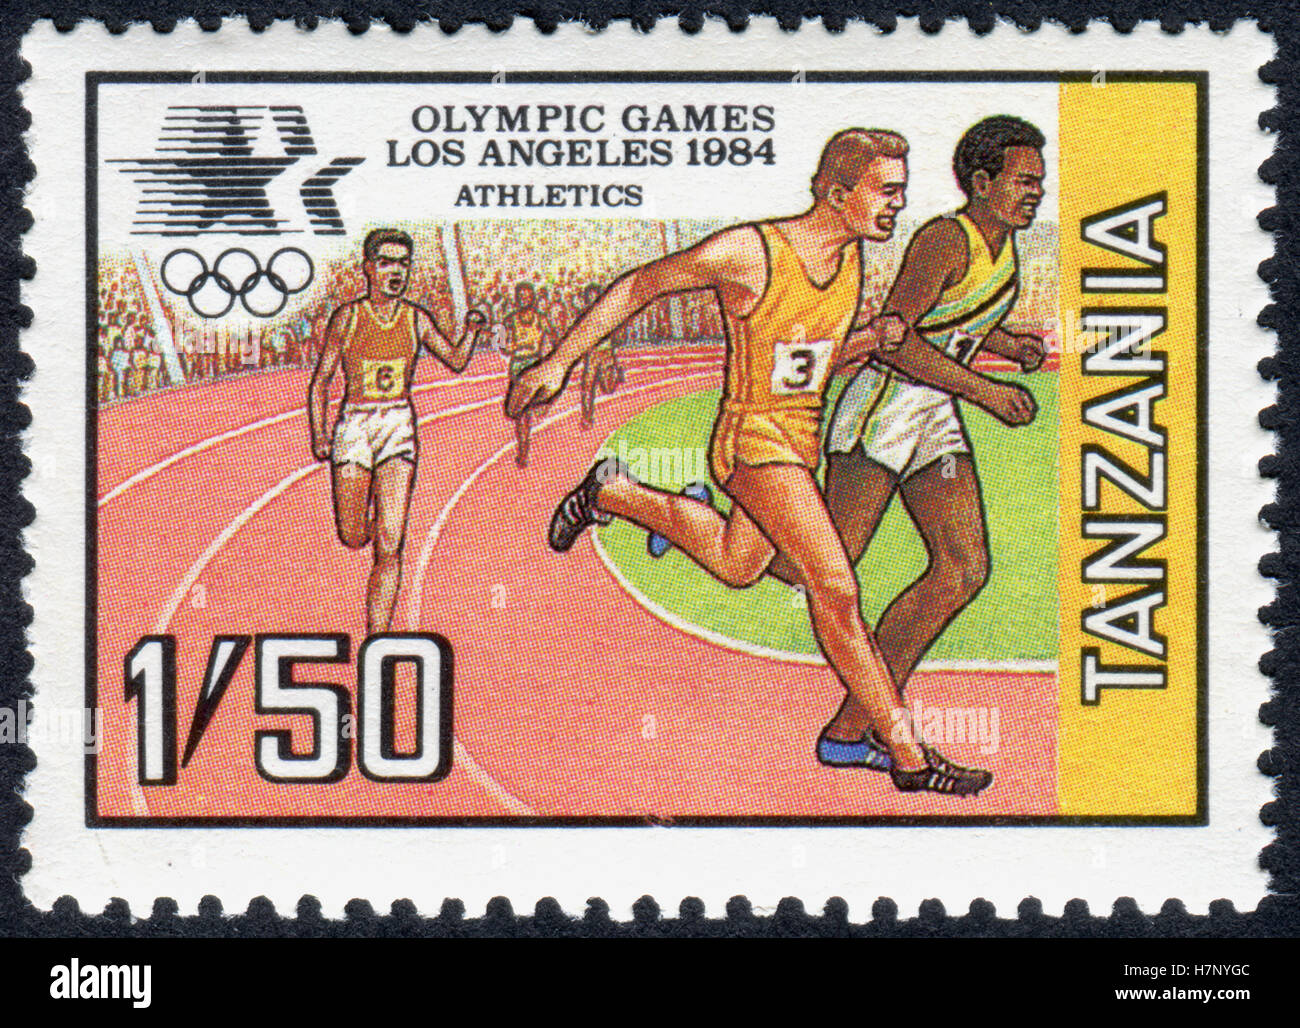 A stamp printed in Tanzania dedicated to the Olympic Games in 1984 - Los Angeles, shows Running Stock Photo